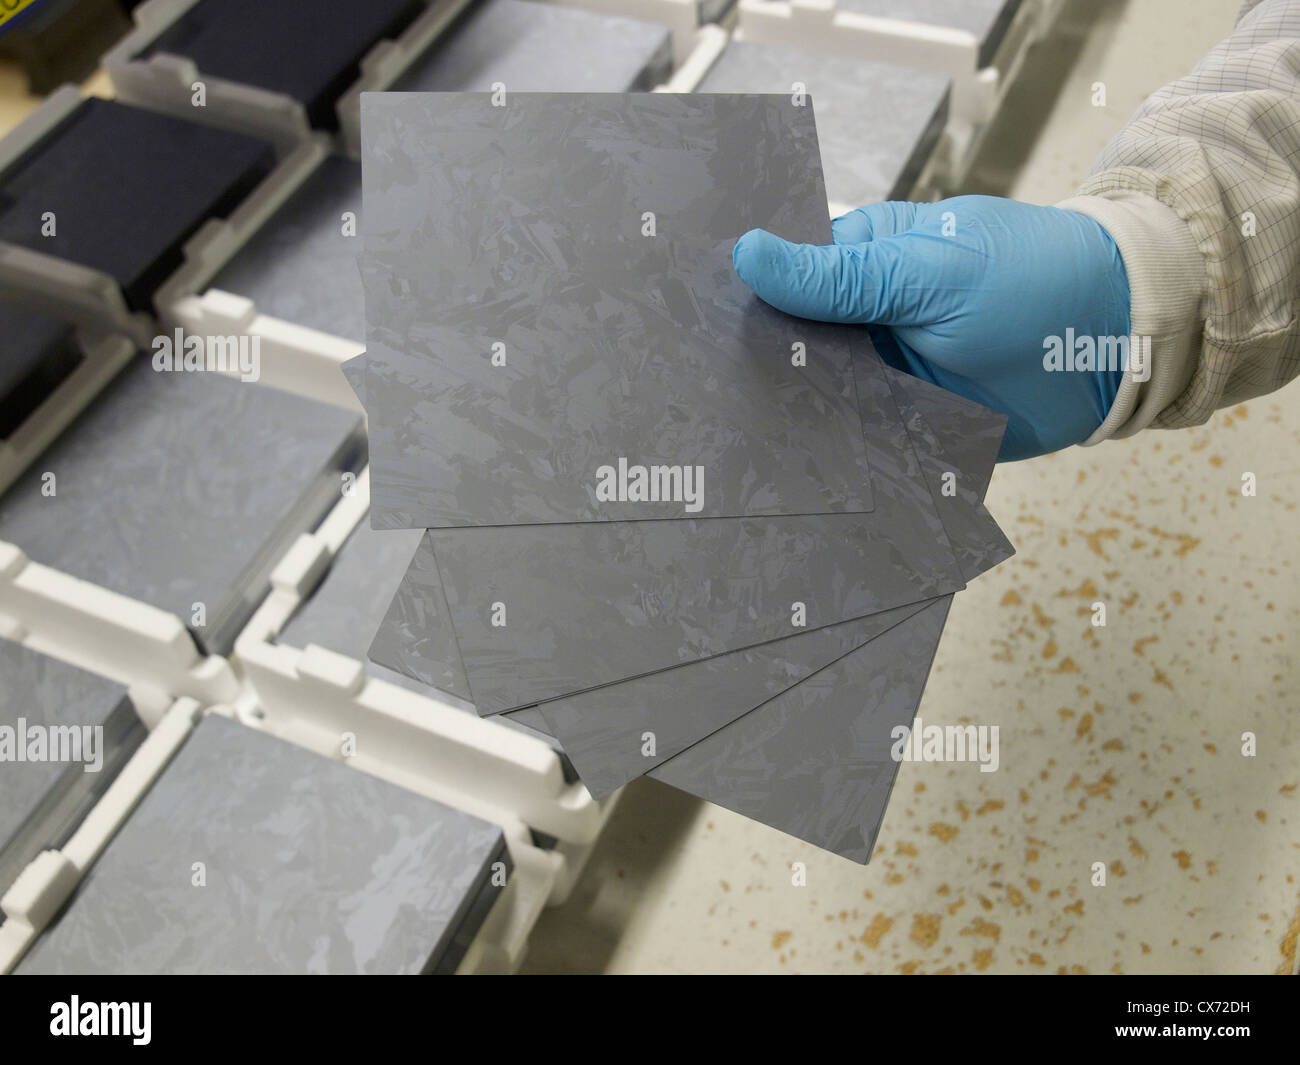 Hand holding 200 micron thick polycrystalline silicon wafers that will be used for solar cell production. Stock Photo